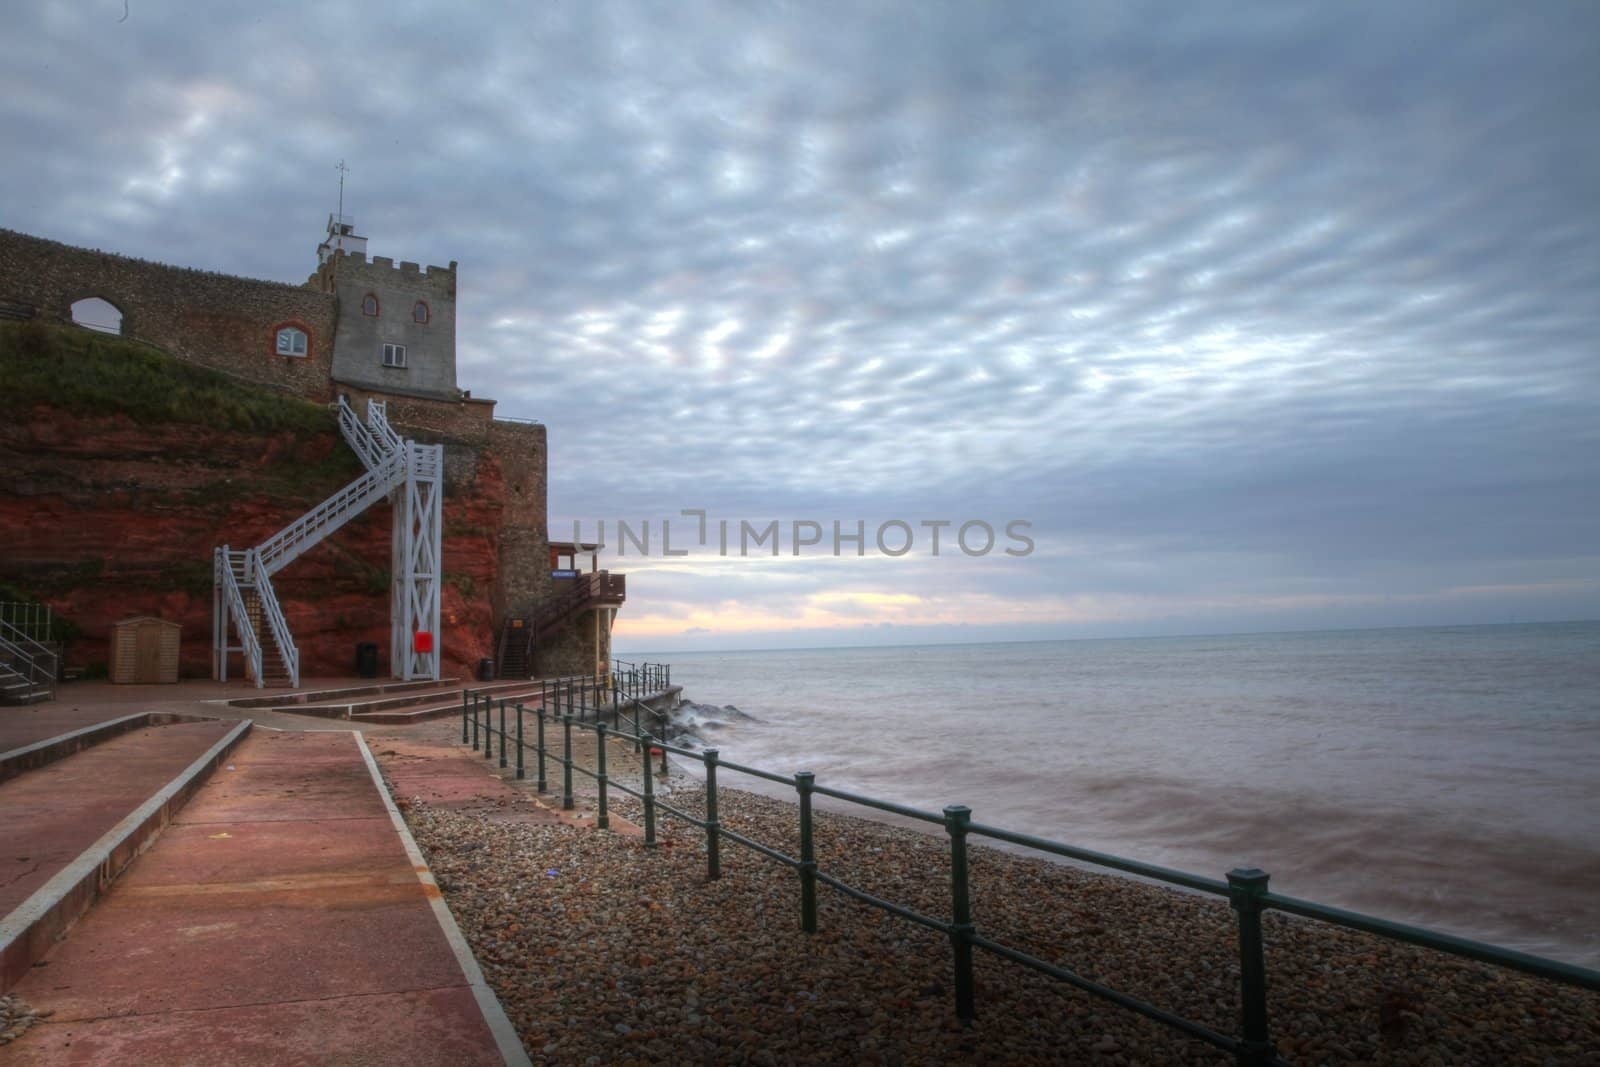 Jacob's Ladder in Sidmouth by olliemt